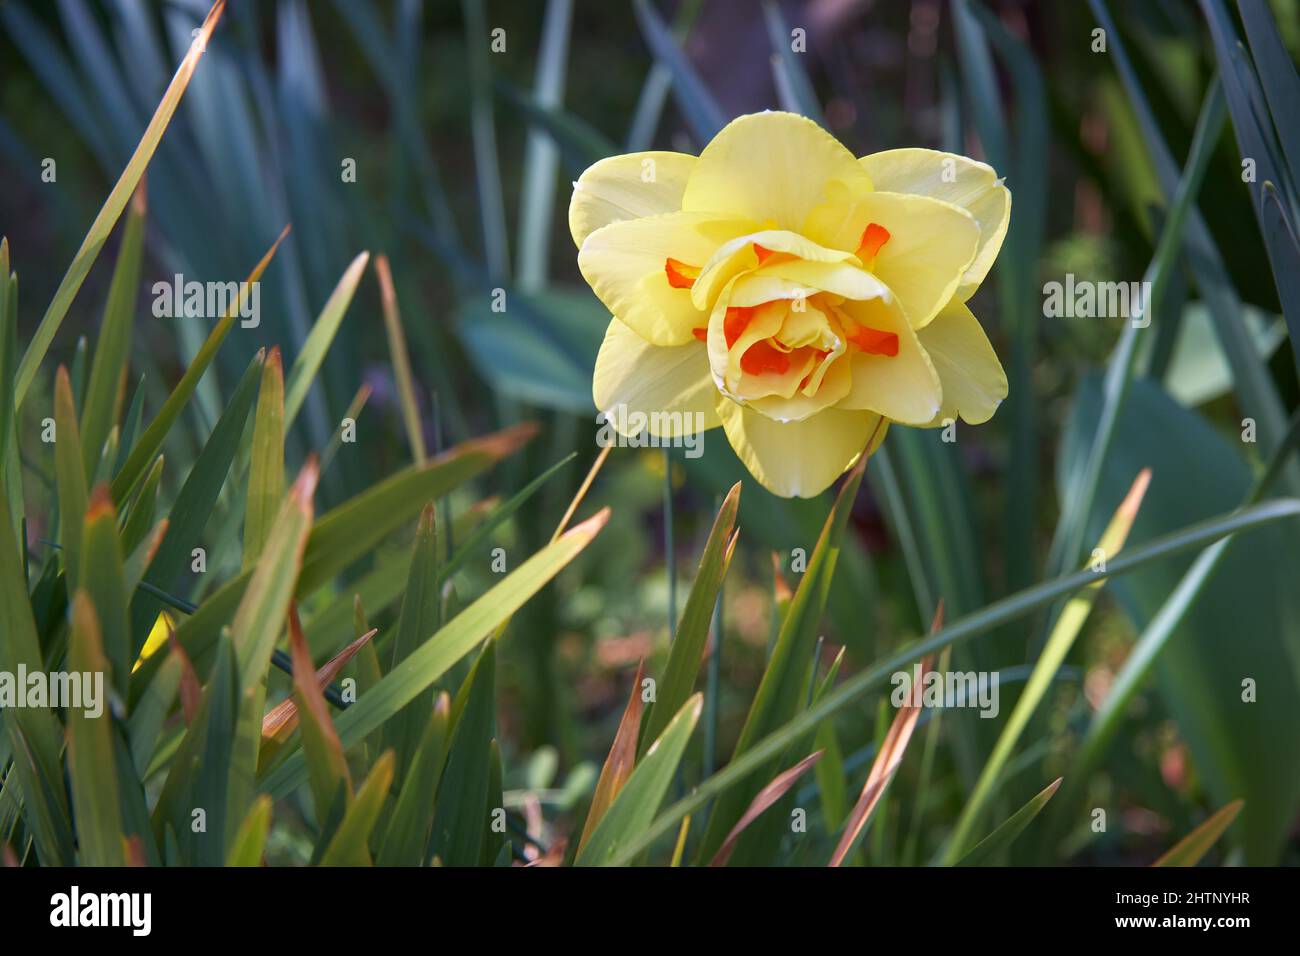 Beautiful Double Flowering Narcissus  (Daffodil). Japan Stock Photo